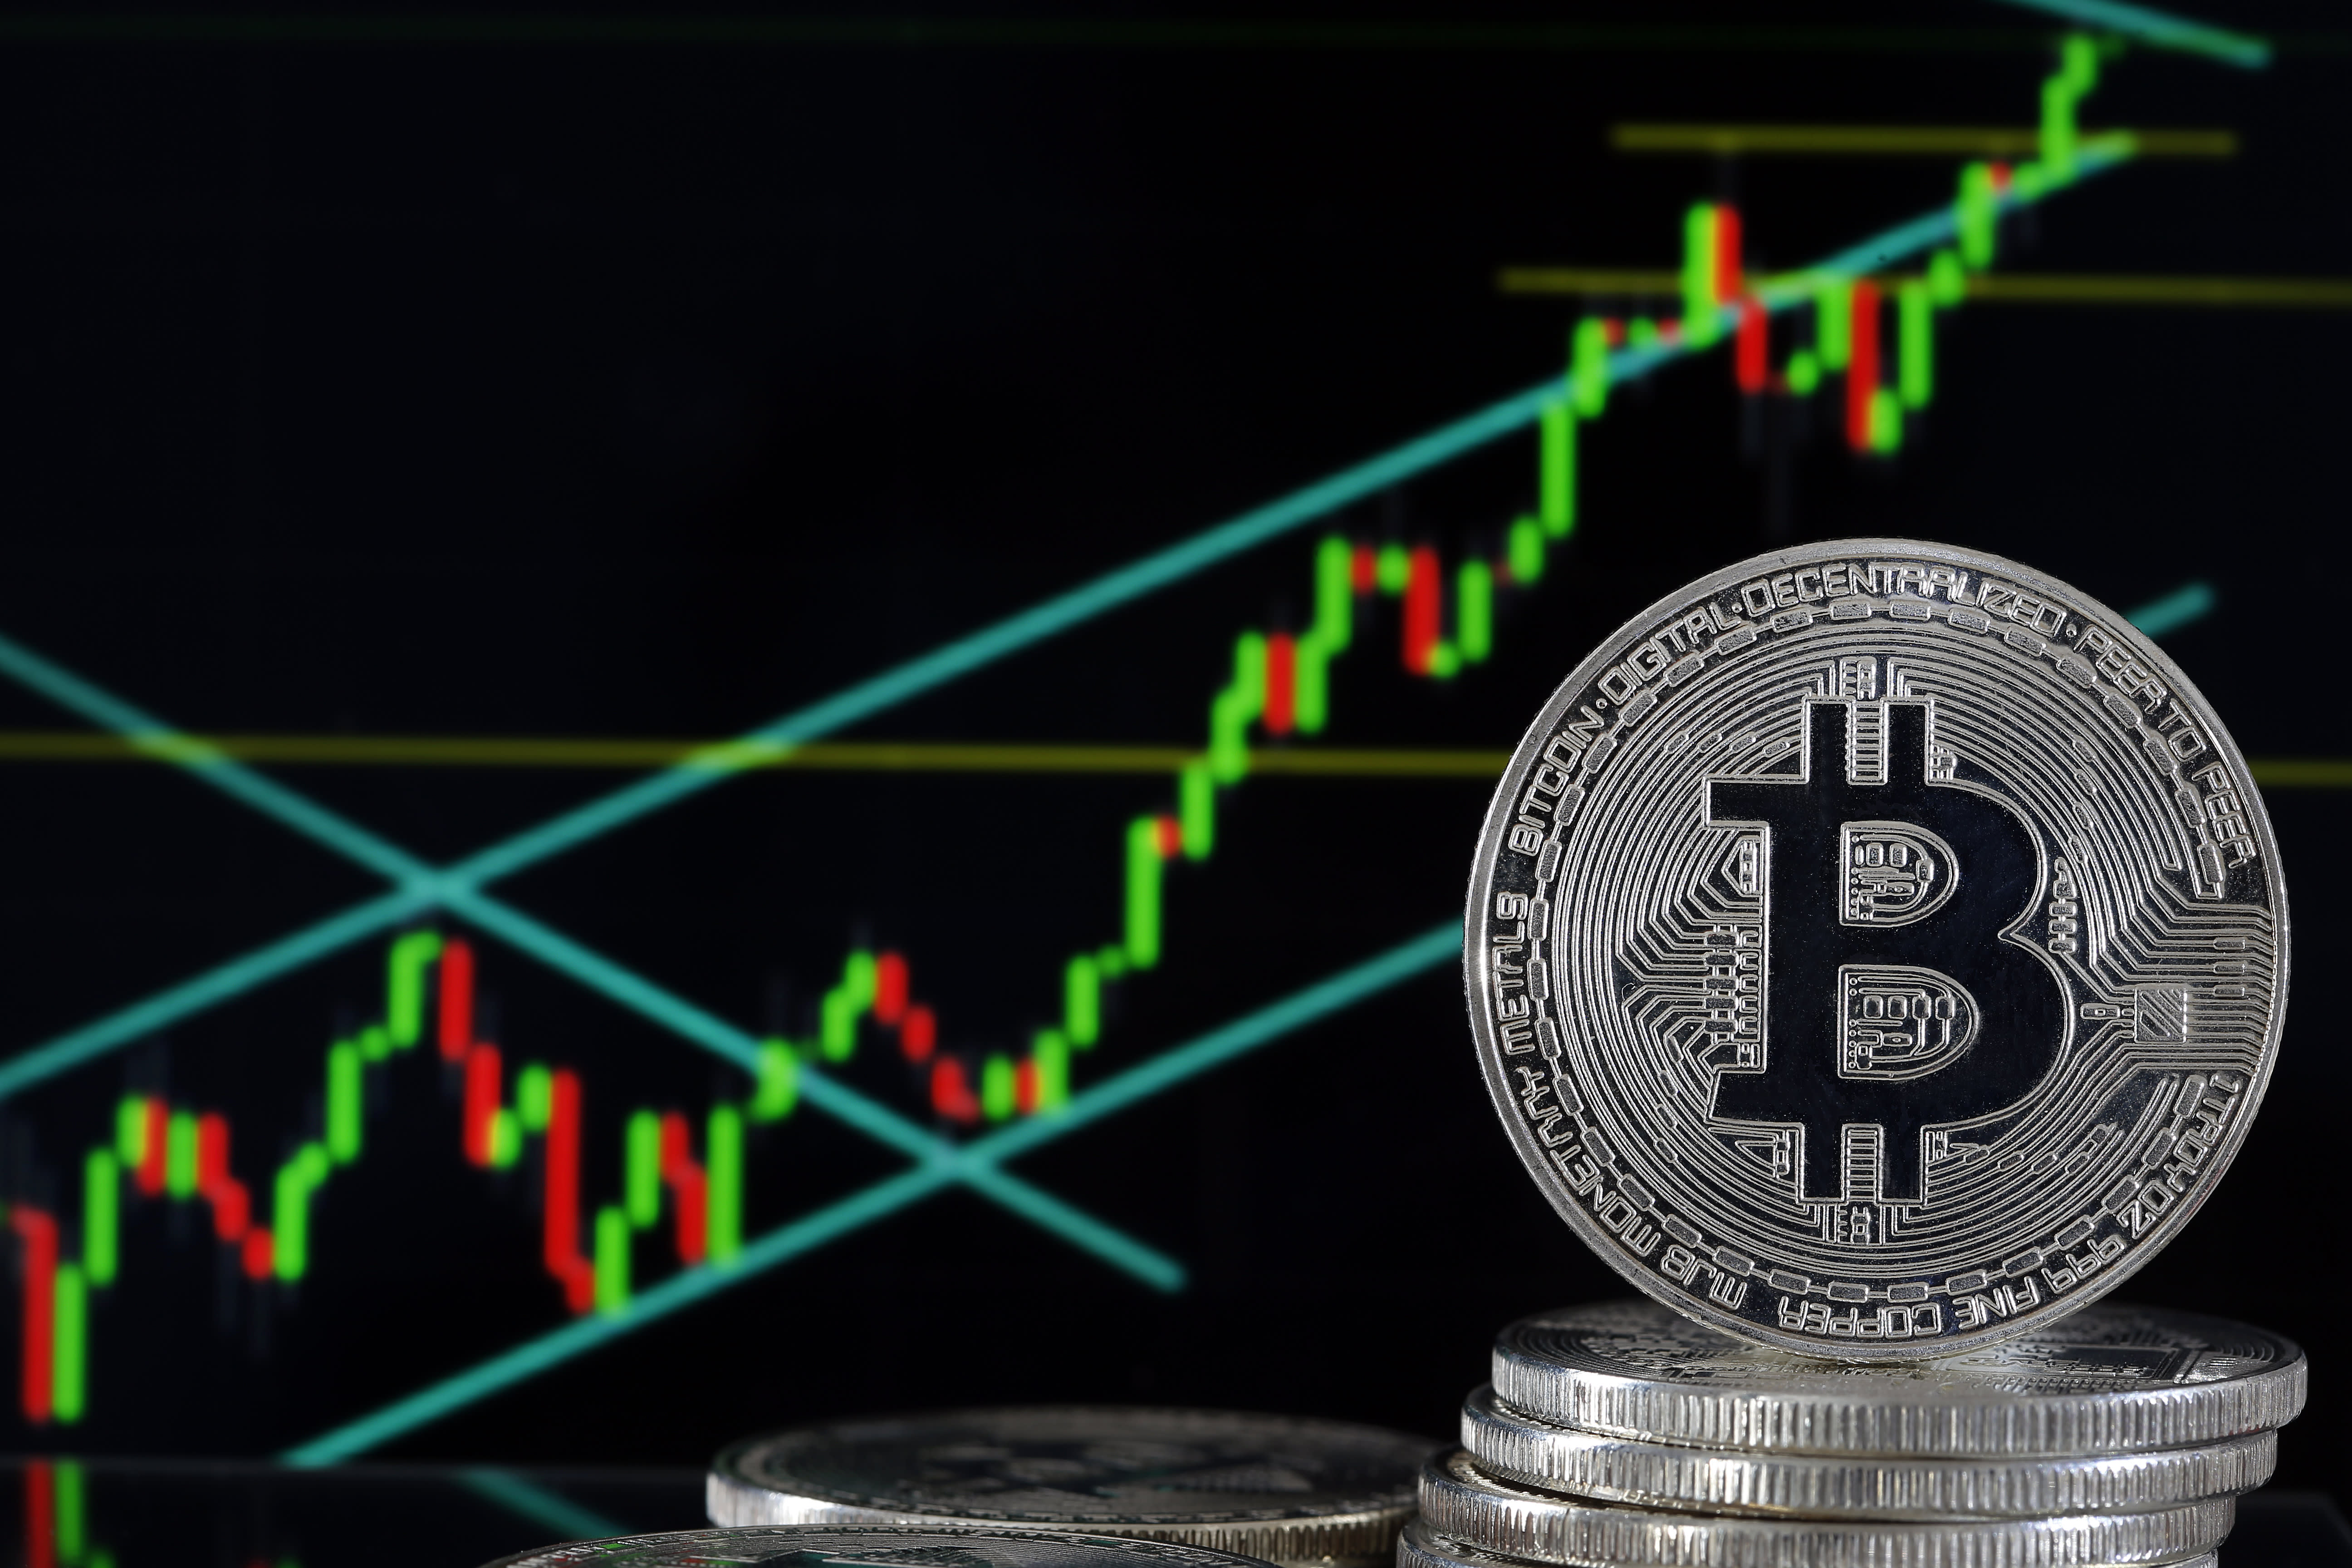 Bitcoin Rally (BTC) extends, price hits record high above $ 37,700